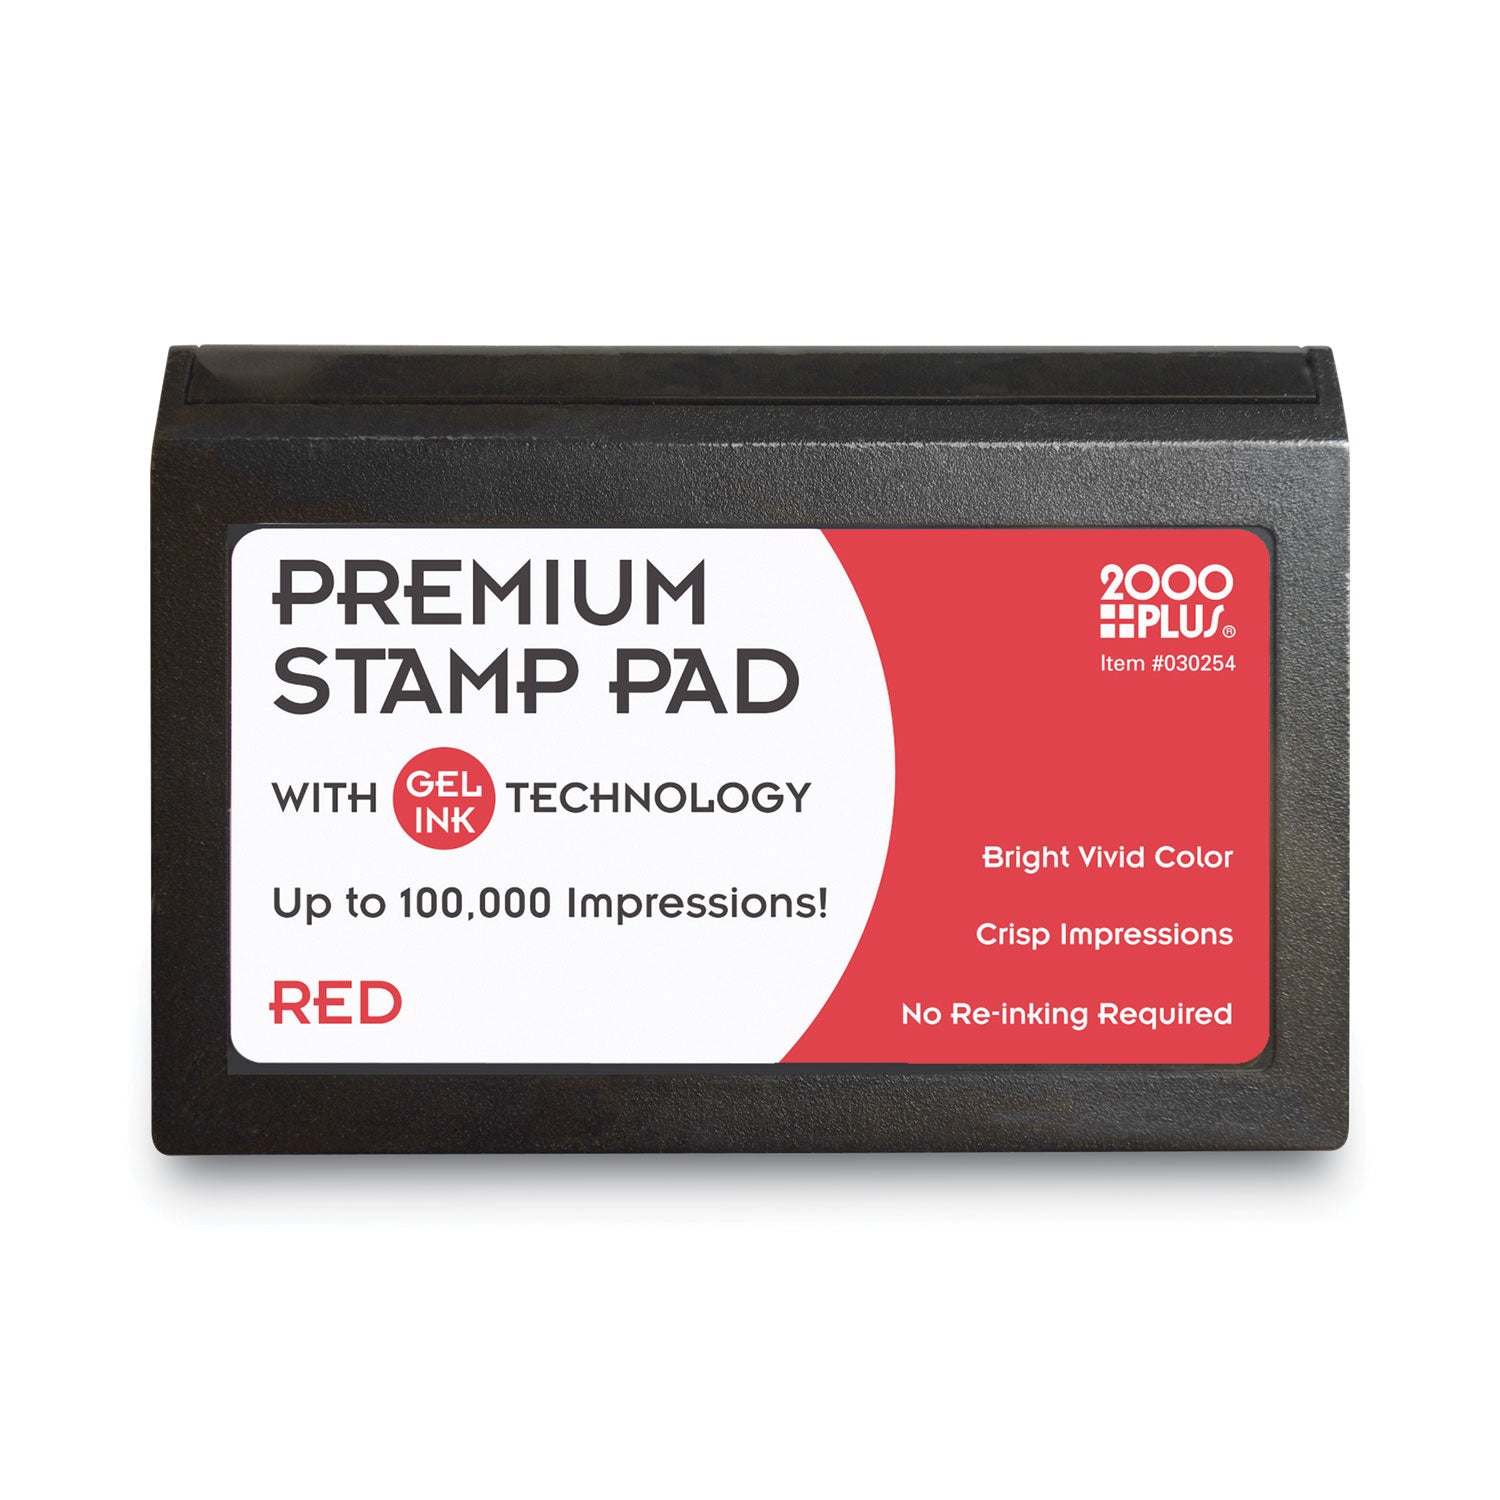 Microgel Stamp Pad for 2000 PLUS, 4.25" x 2.75", Red - 